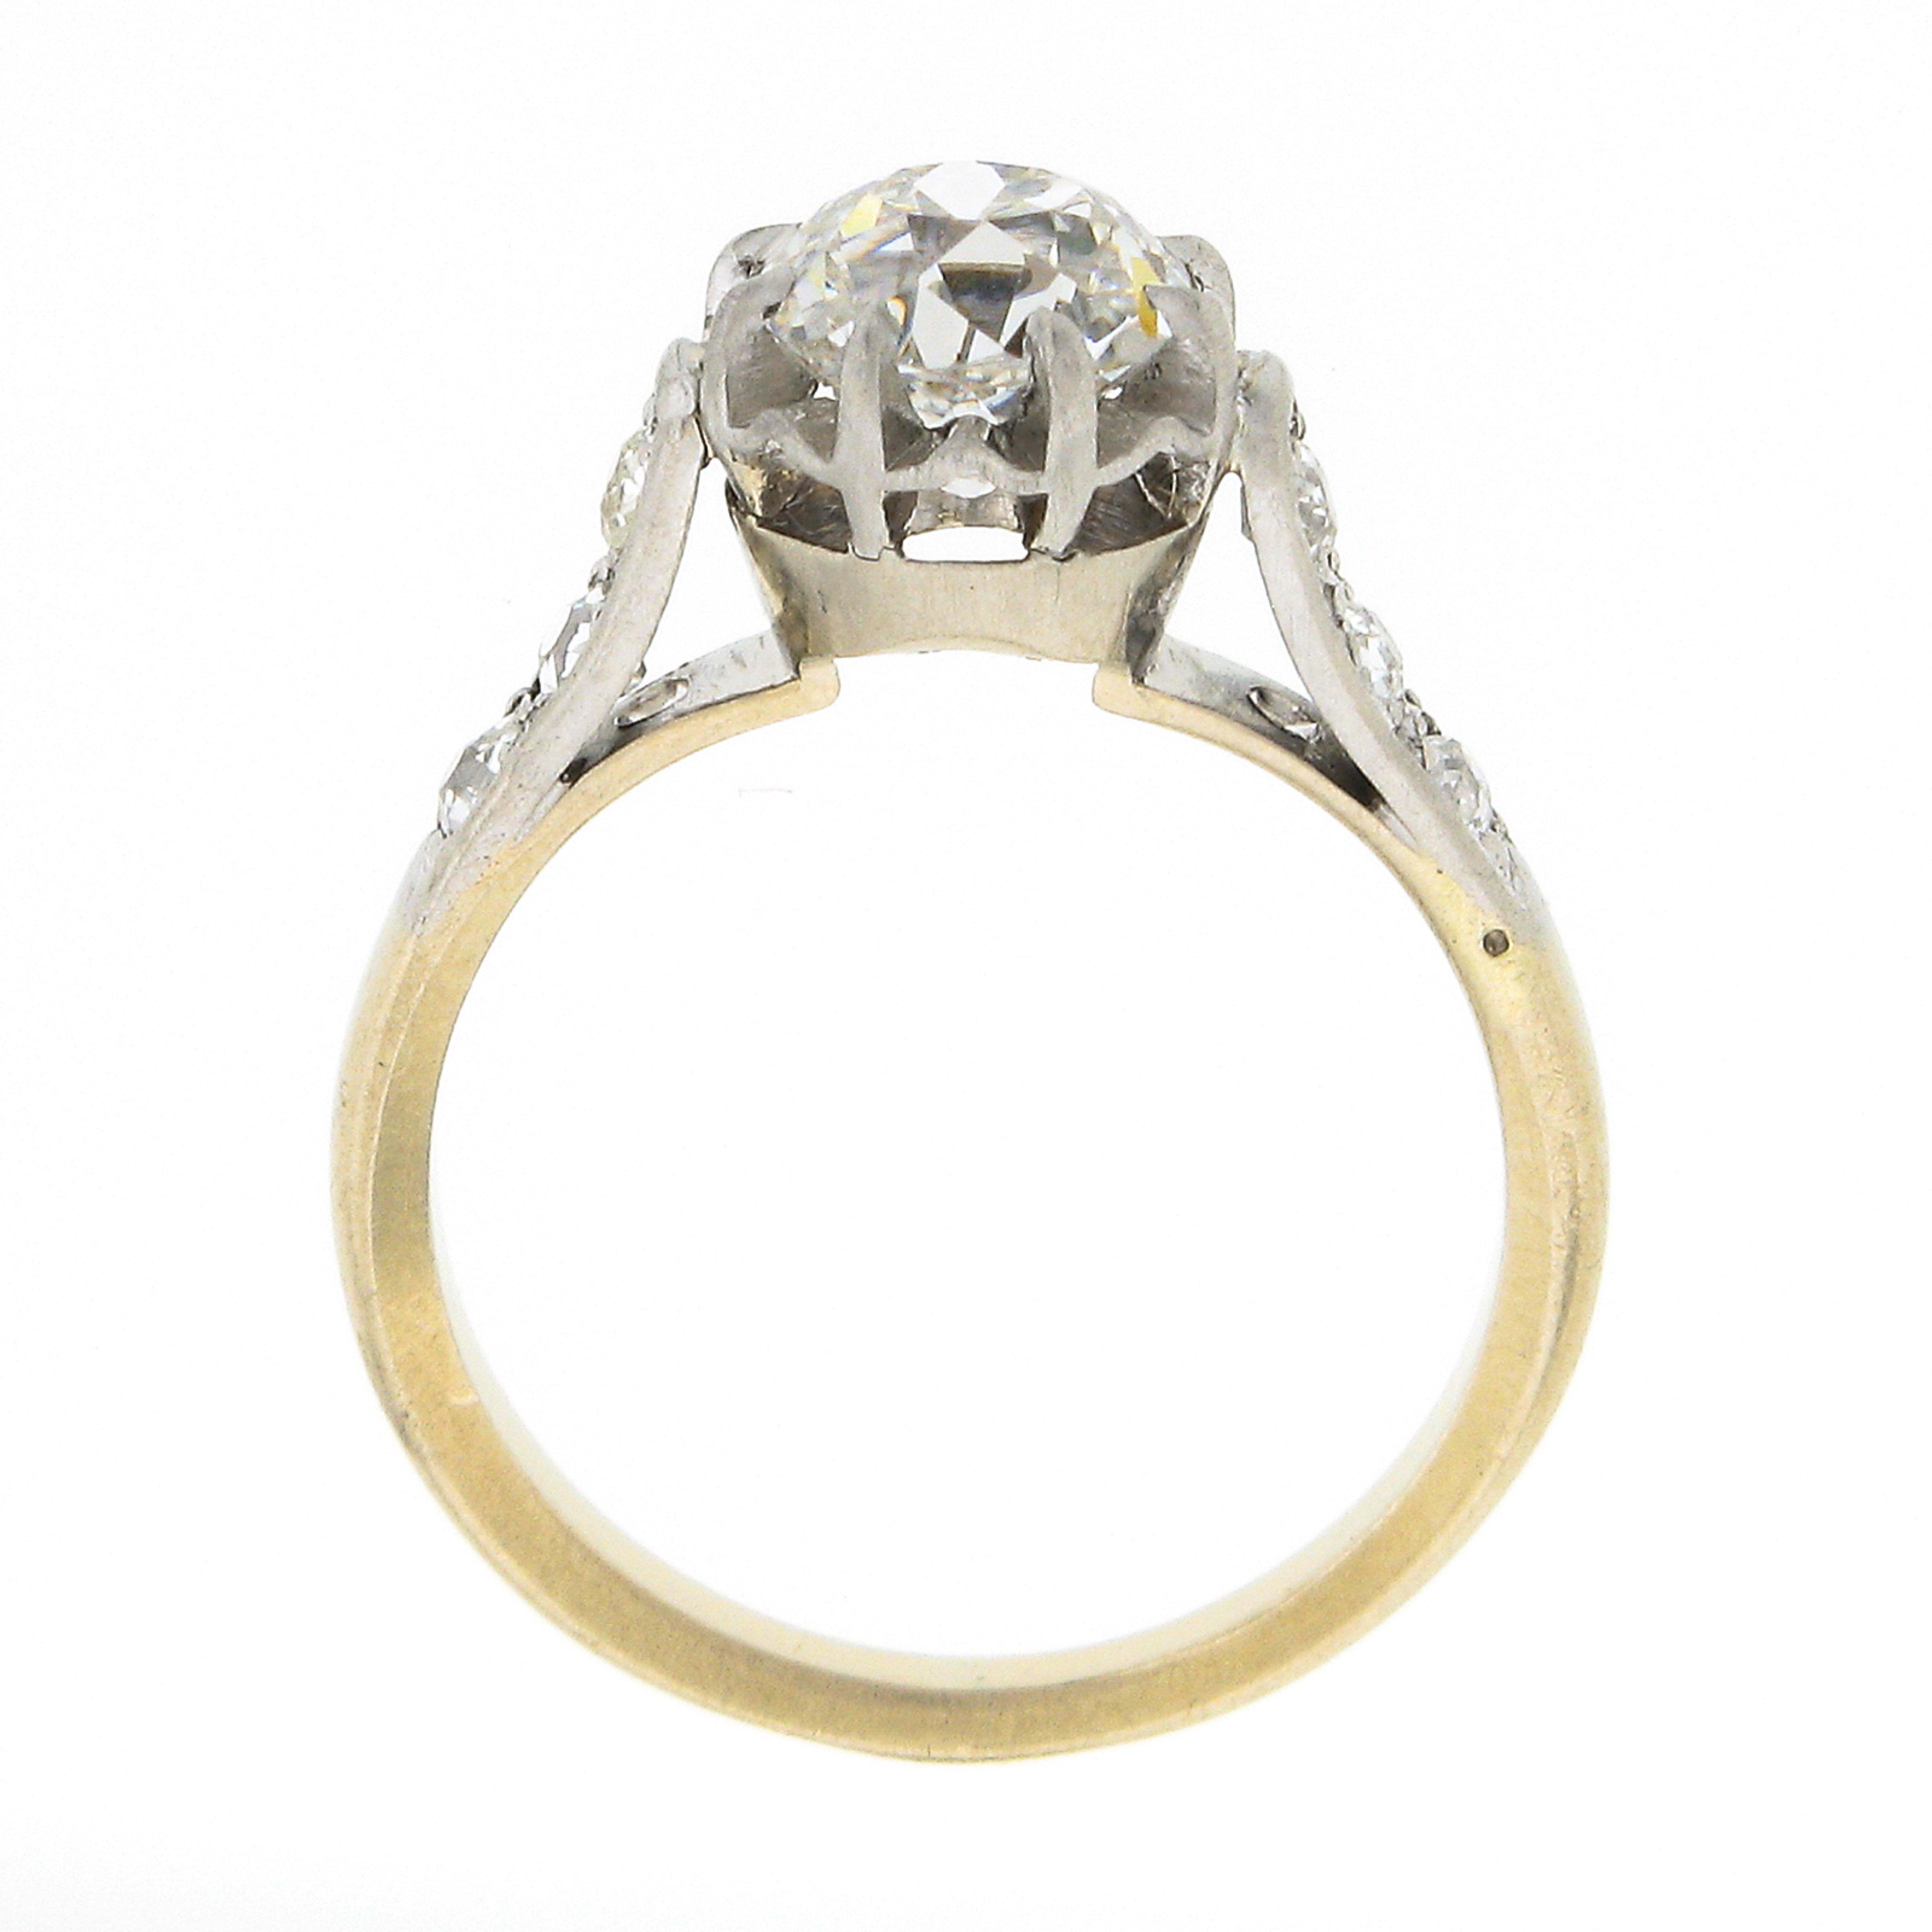 Antique Edwardian French Plat 18k Gold 1.7ct GIA European Diamond Solitaire Ring For Sale 3